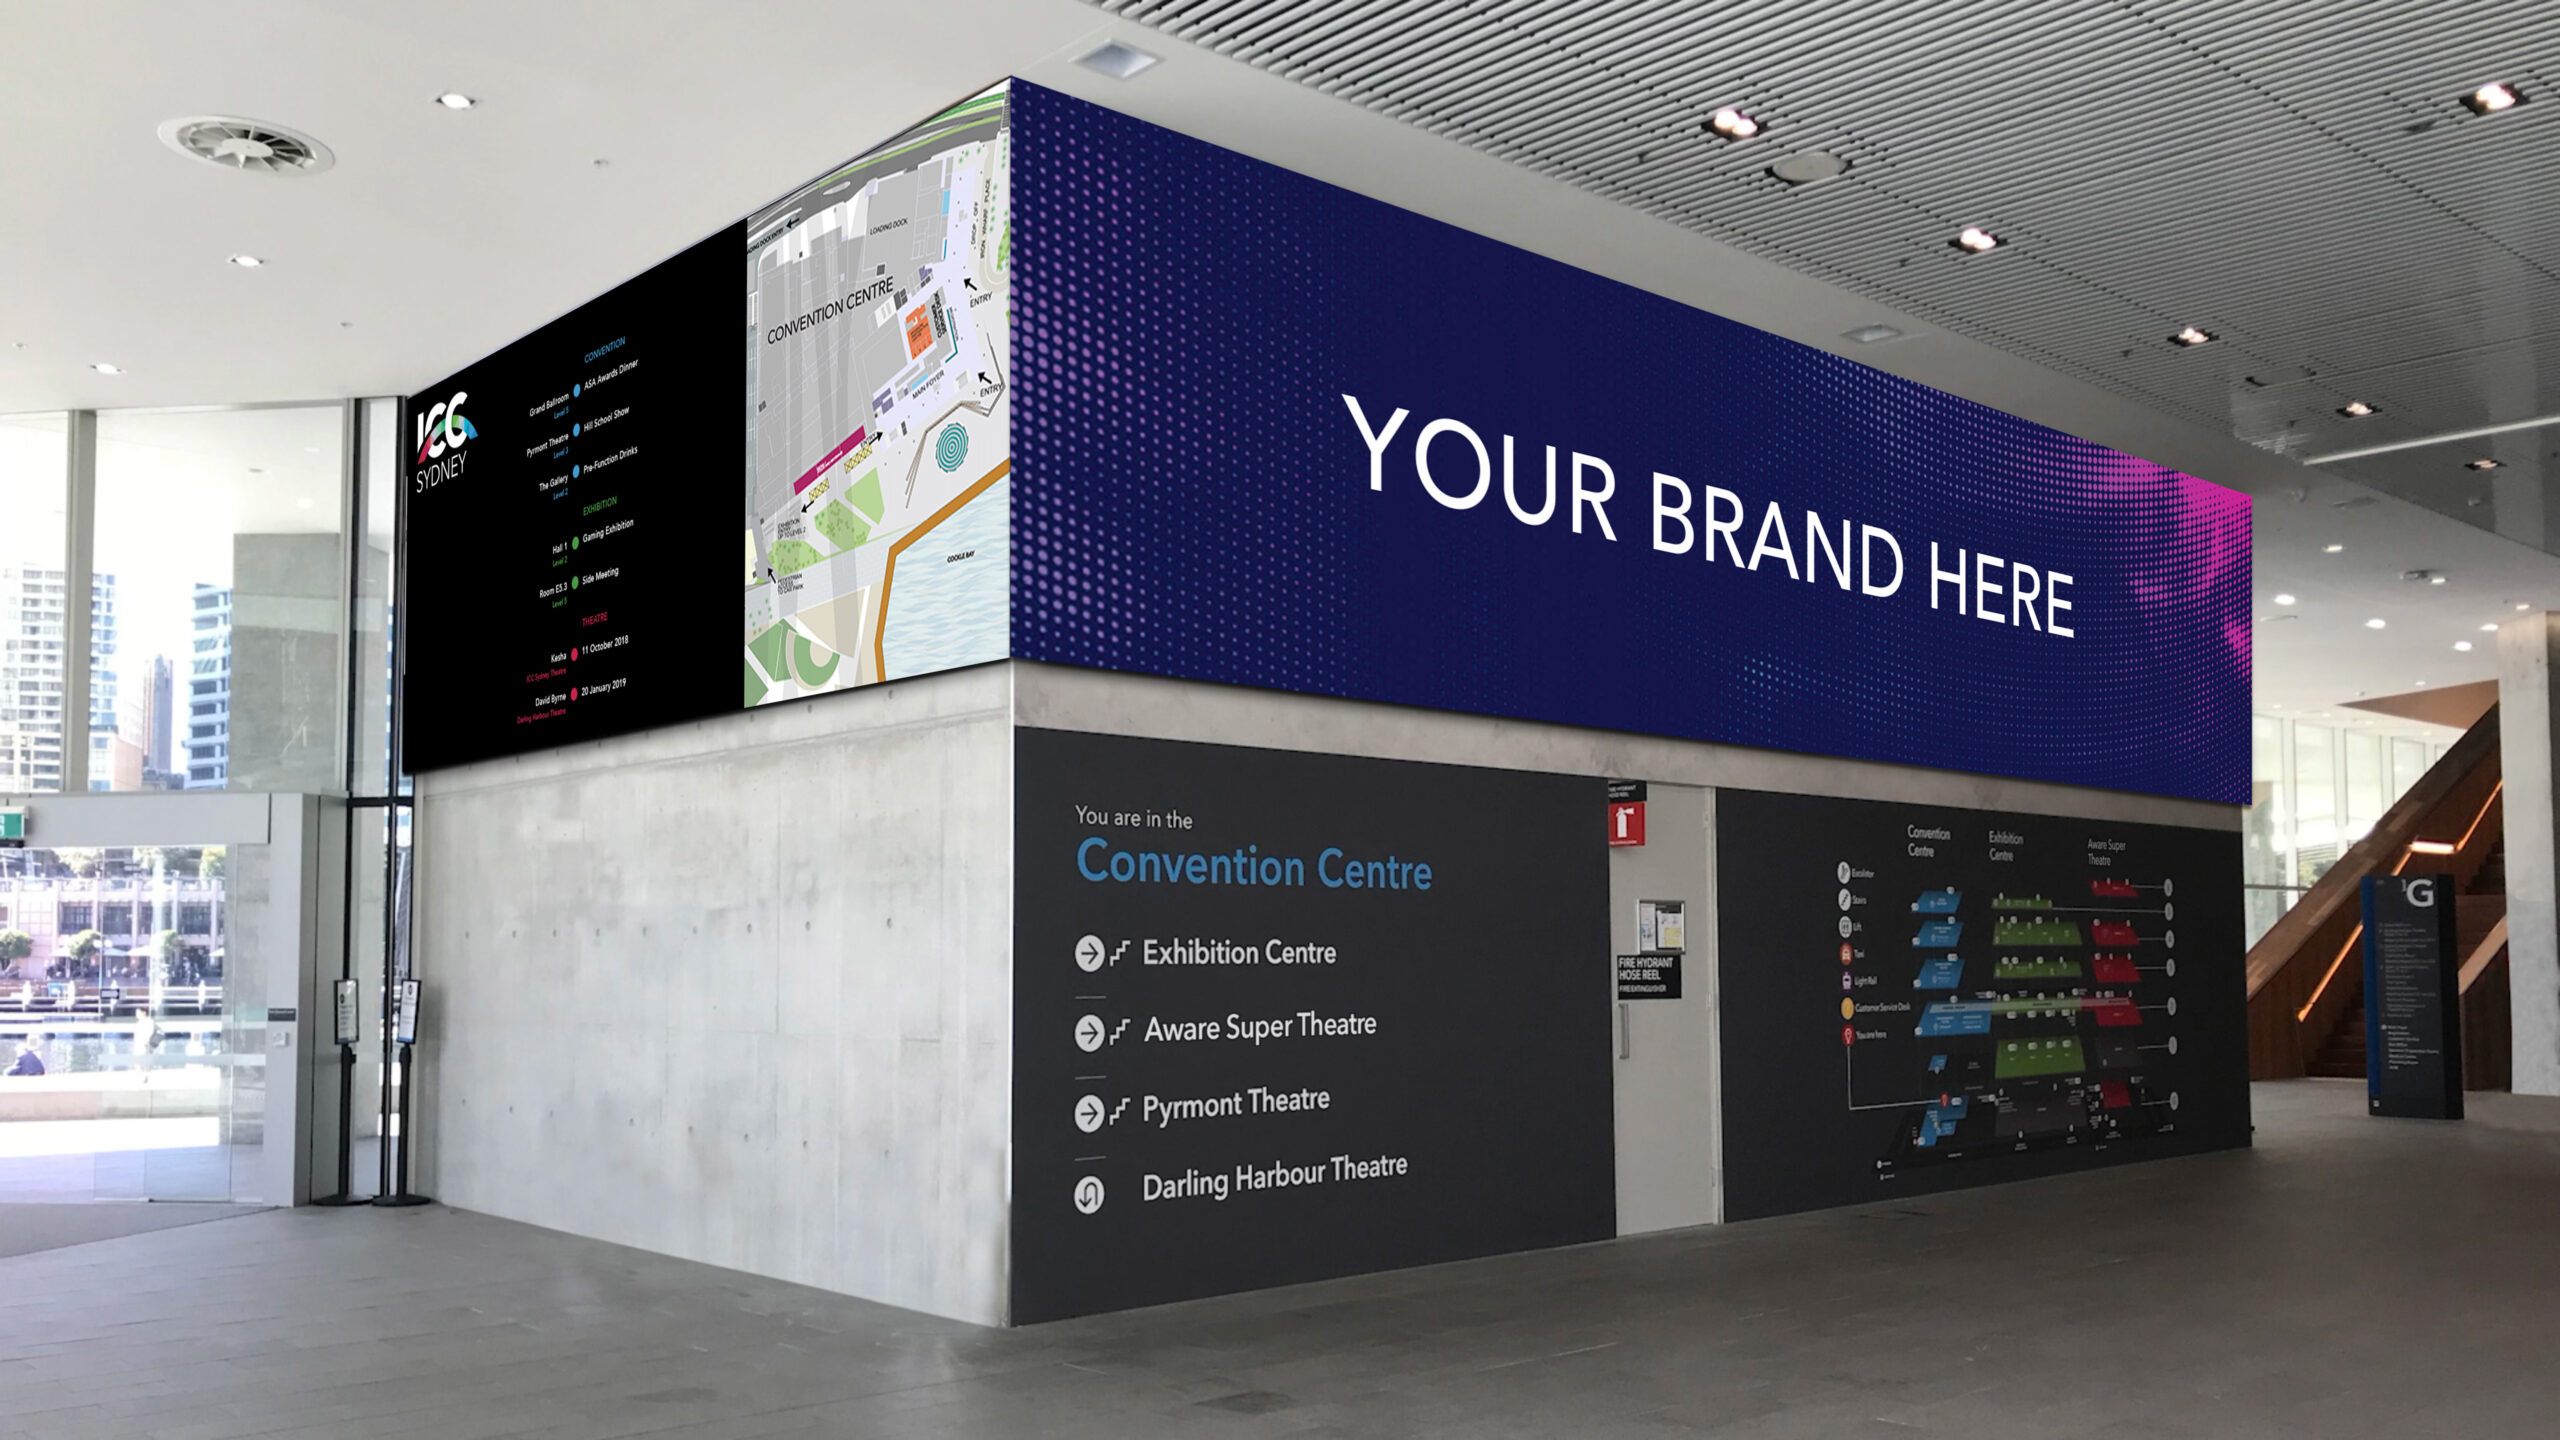 Digital Signage Opportunities